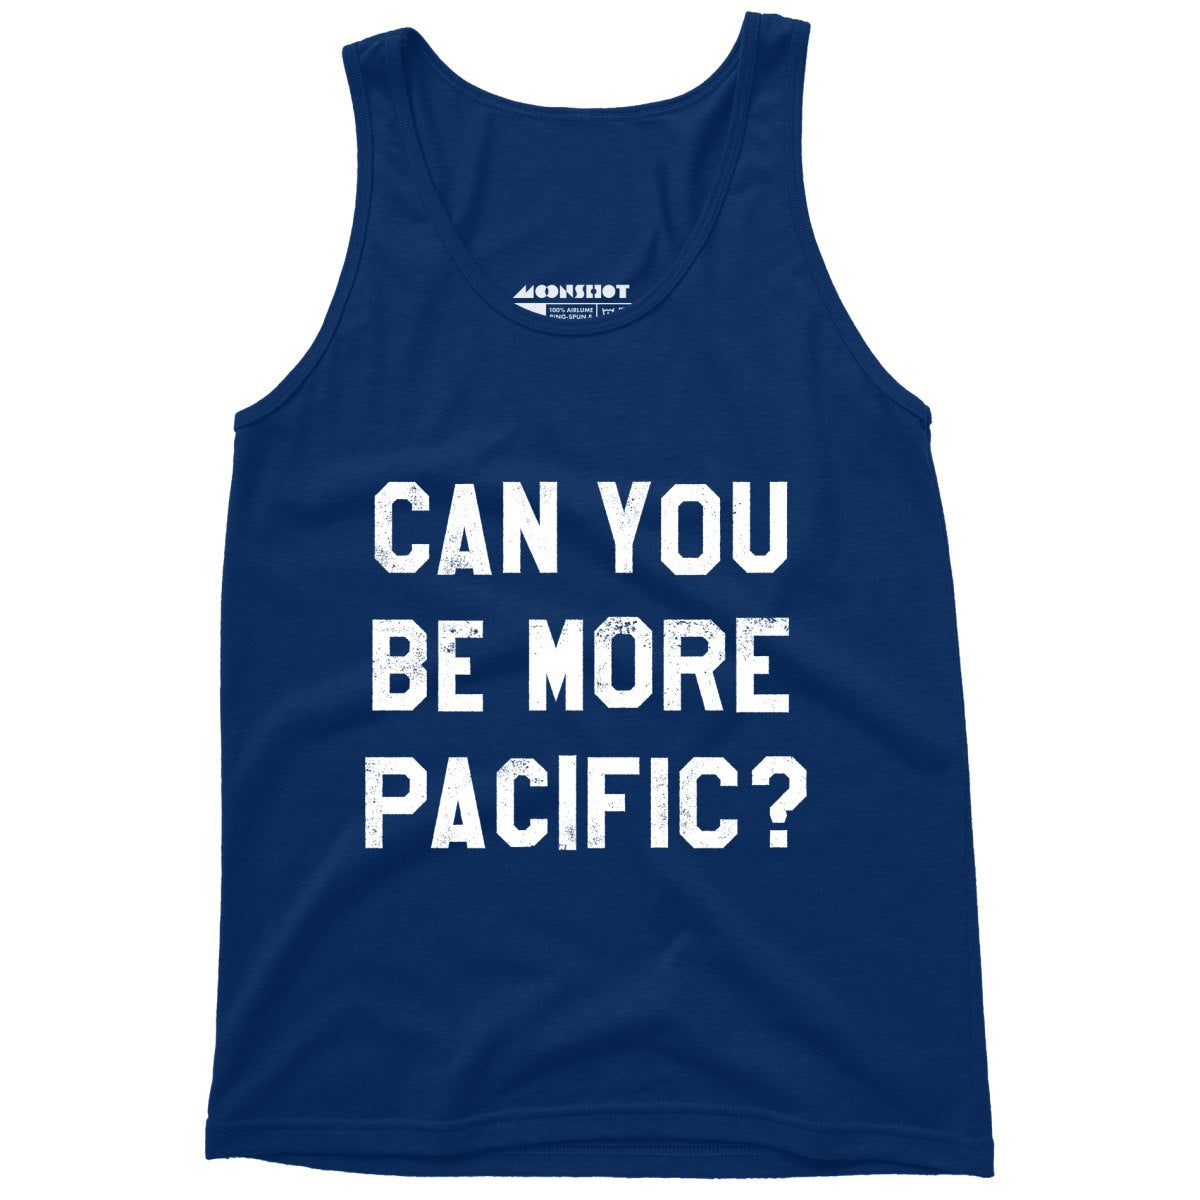 Can You Be More Pacific? - Unisex Tank Top